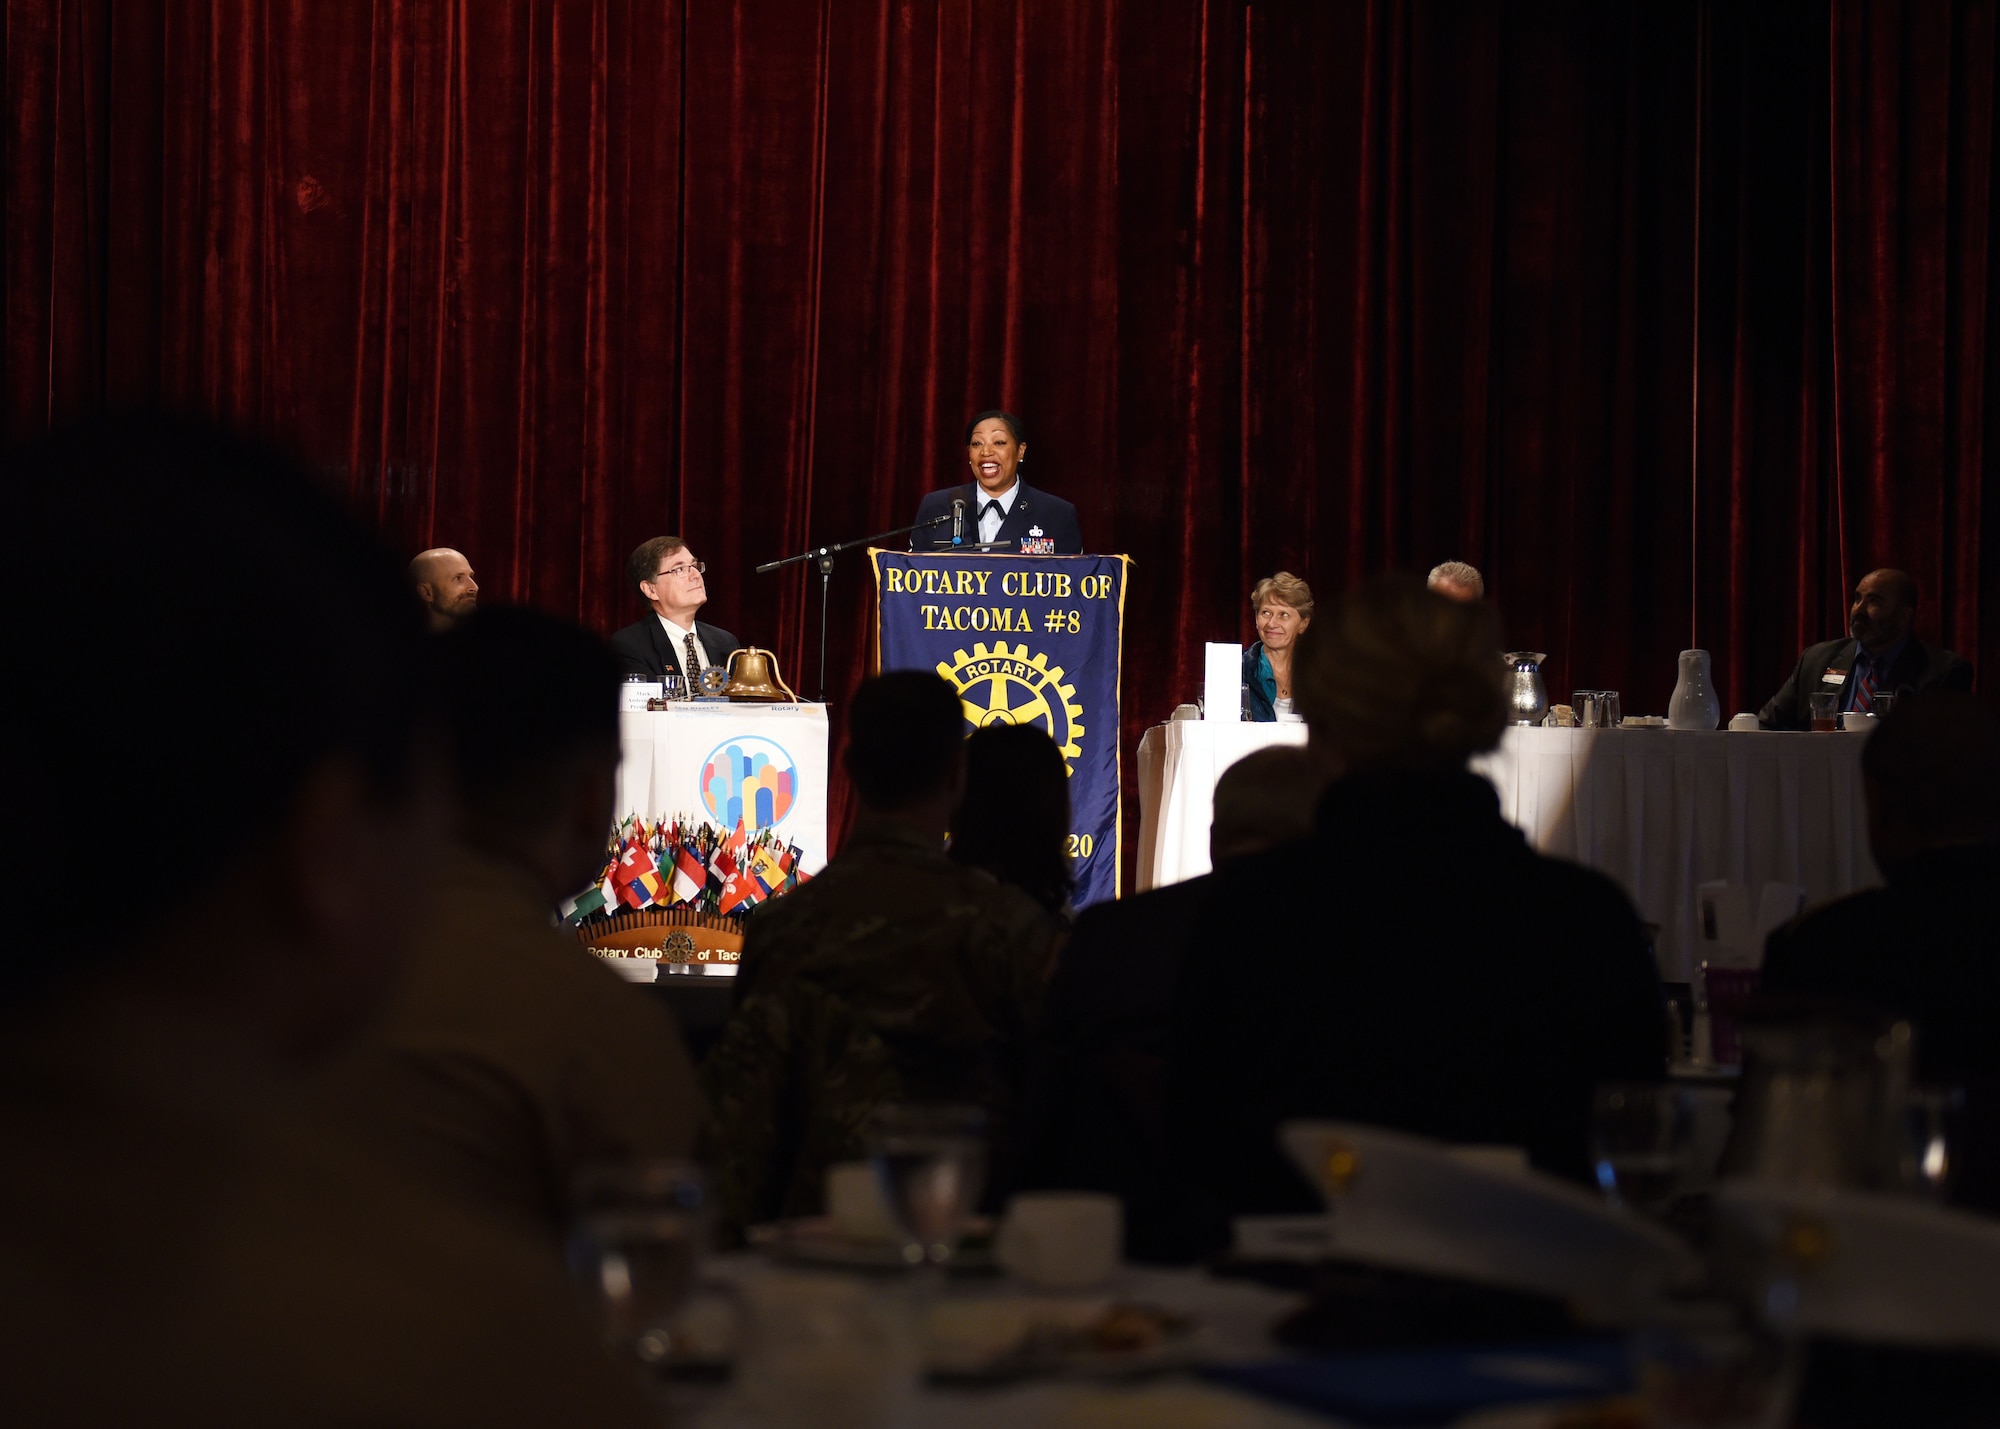 Master Sgt. Monique DuBose, 62nd Airlift Wing Office of the Inspector General superintendent, speaks to members of the Tacoma Rotary Club, fellow service members and veterans, and friends and family after being named the 39th recipient of the John H. Anderson Military Citizen of the Year Award at a luncheon, Nov. 9, 2017 in downtown Tacoma. In addition to being an active-duty Airman, Dubose is a member of the Tacoma Alumnae Chapter of Delta Sigma Theta Sorority, Inc., President of the Tacoma Chapter of Jack & Jill of America, Inc., and the director of training and education for Redefining You Foundation and the founder of Beyond Beauty Women’s Social Saving Club. (U.S. Air Force photo by Staff Sgt. Whitney Taylor)